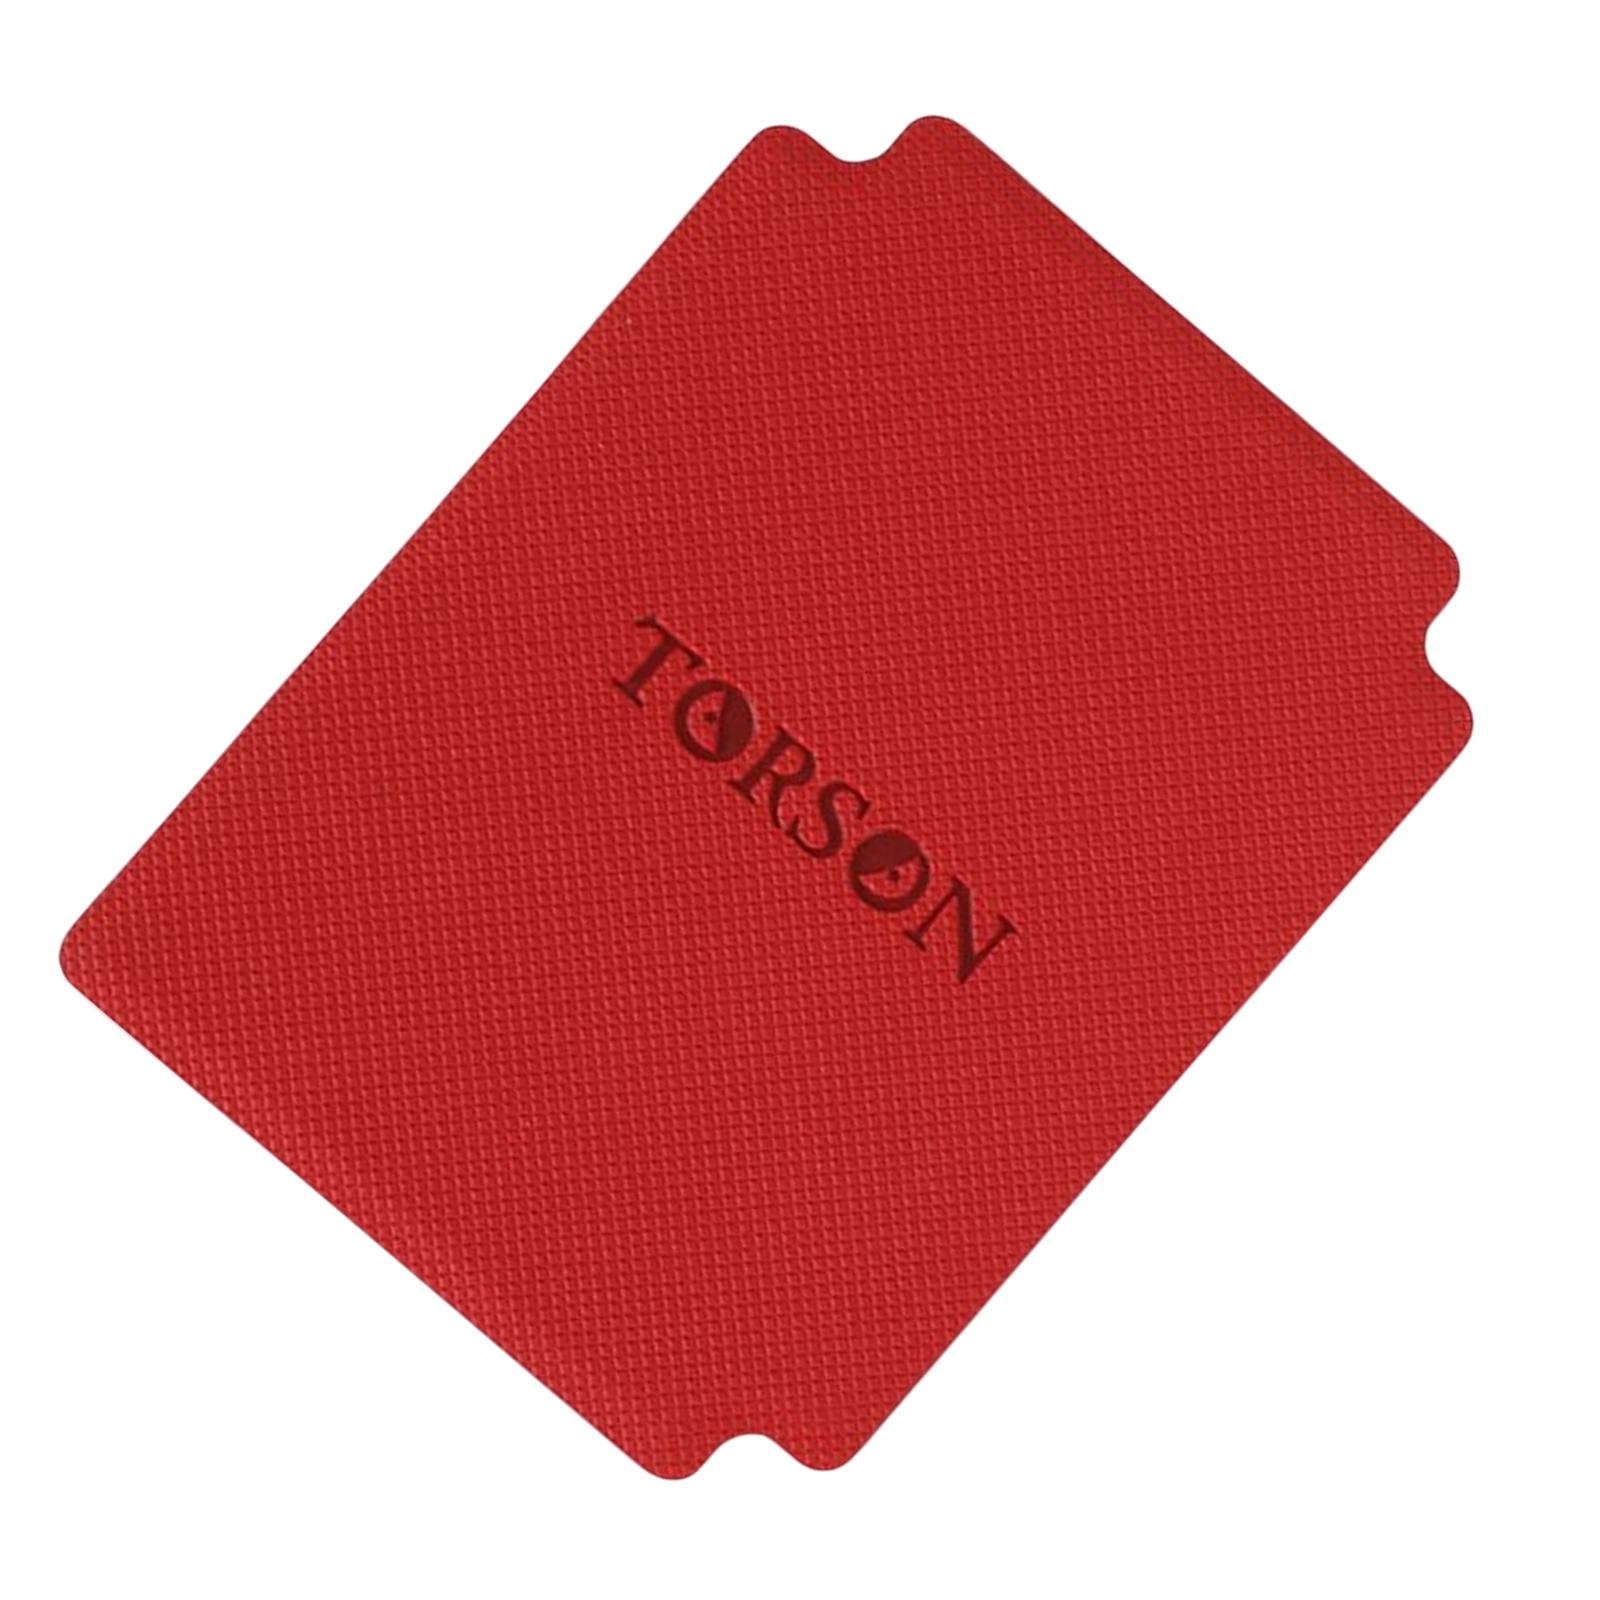 Games Sports Trading Card Dividers Card Separator 2.7 x 3.7 Inches Red